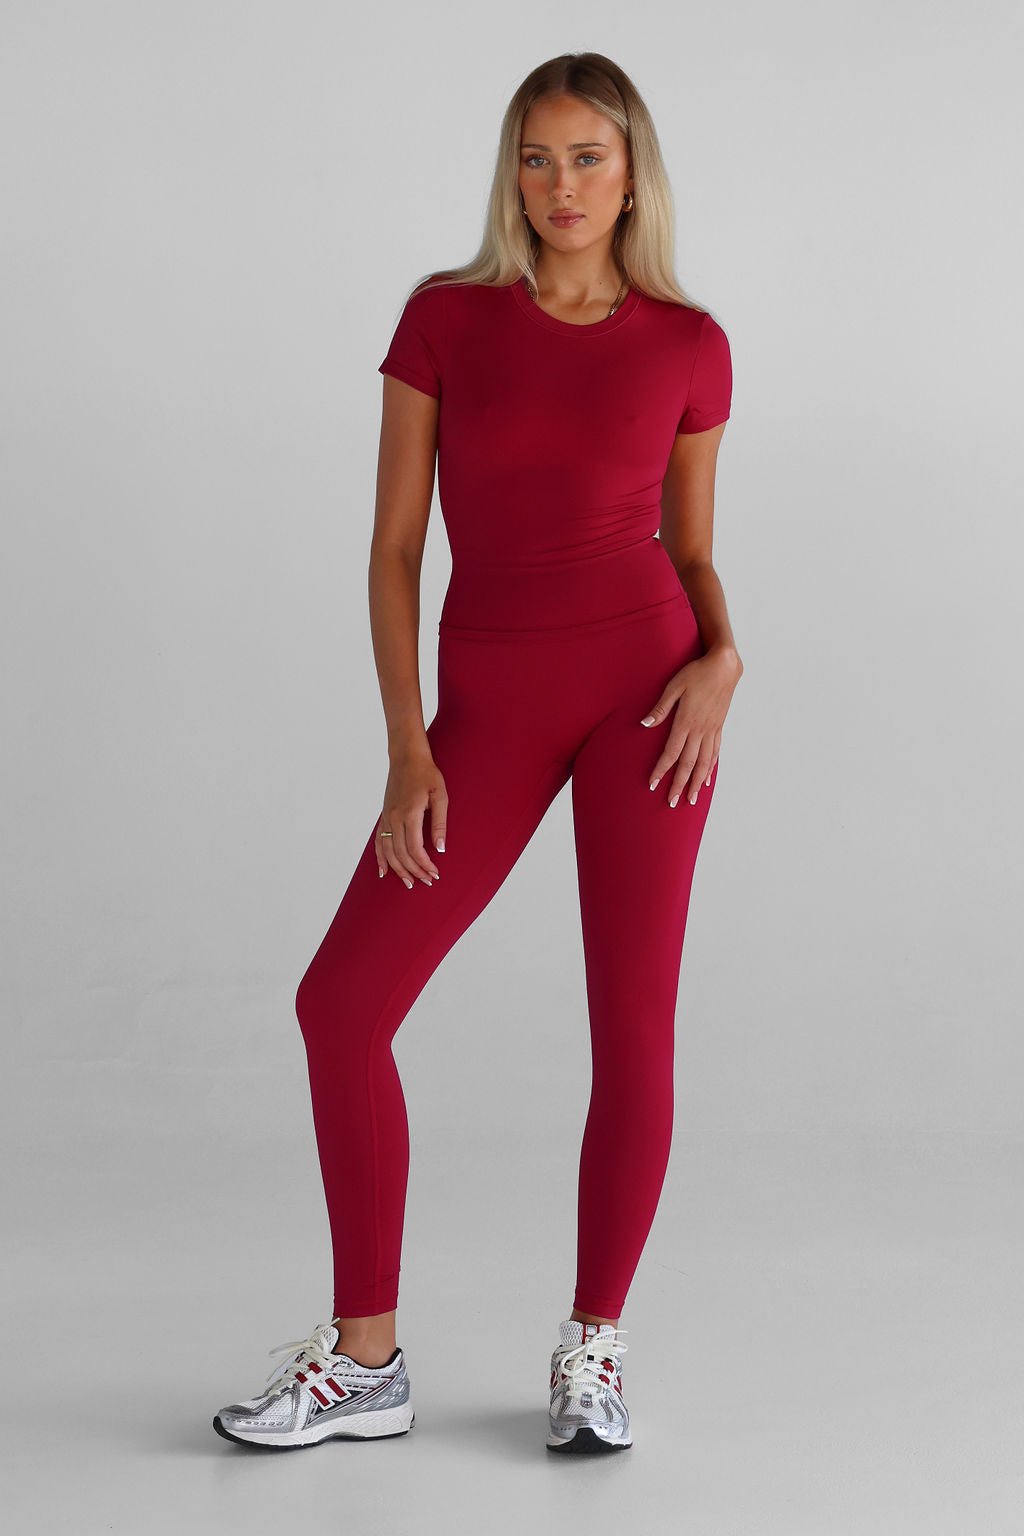 SCULPT Fitted Tee - Cherry - LEELO ACTIVE